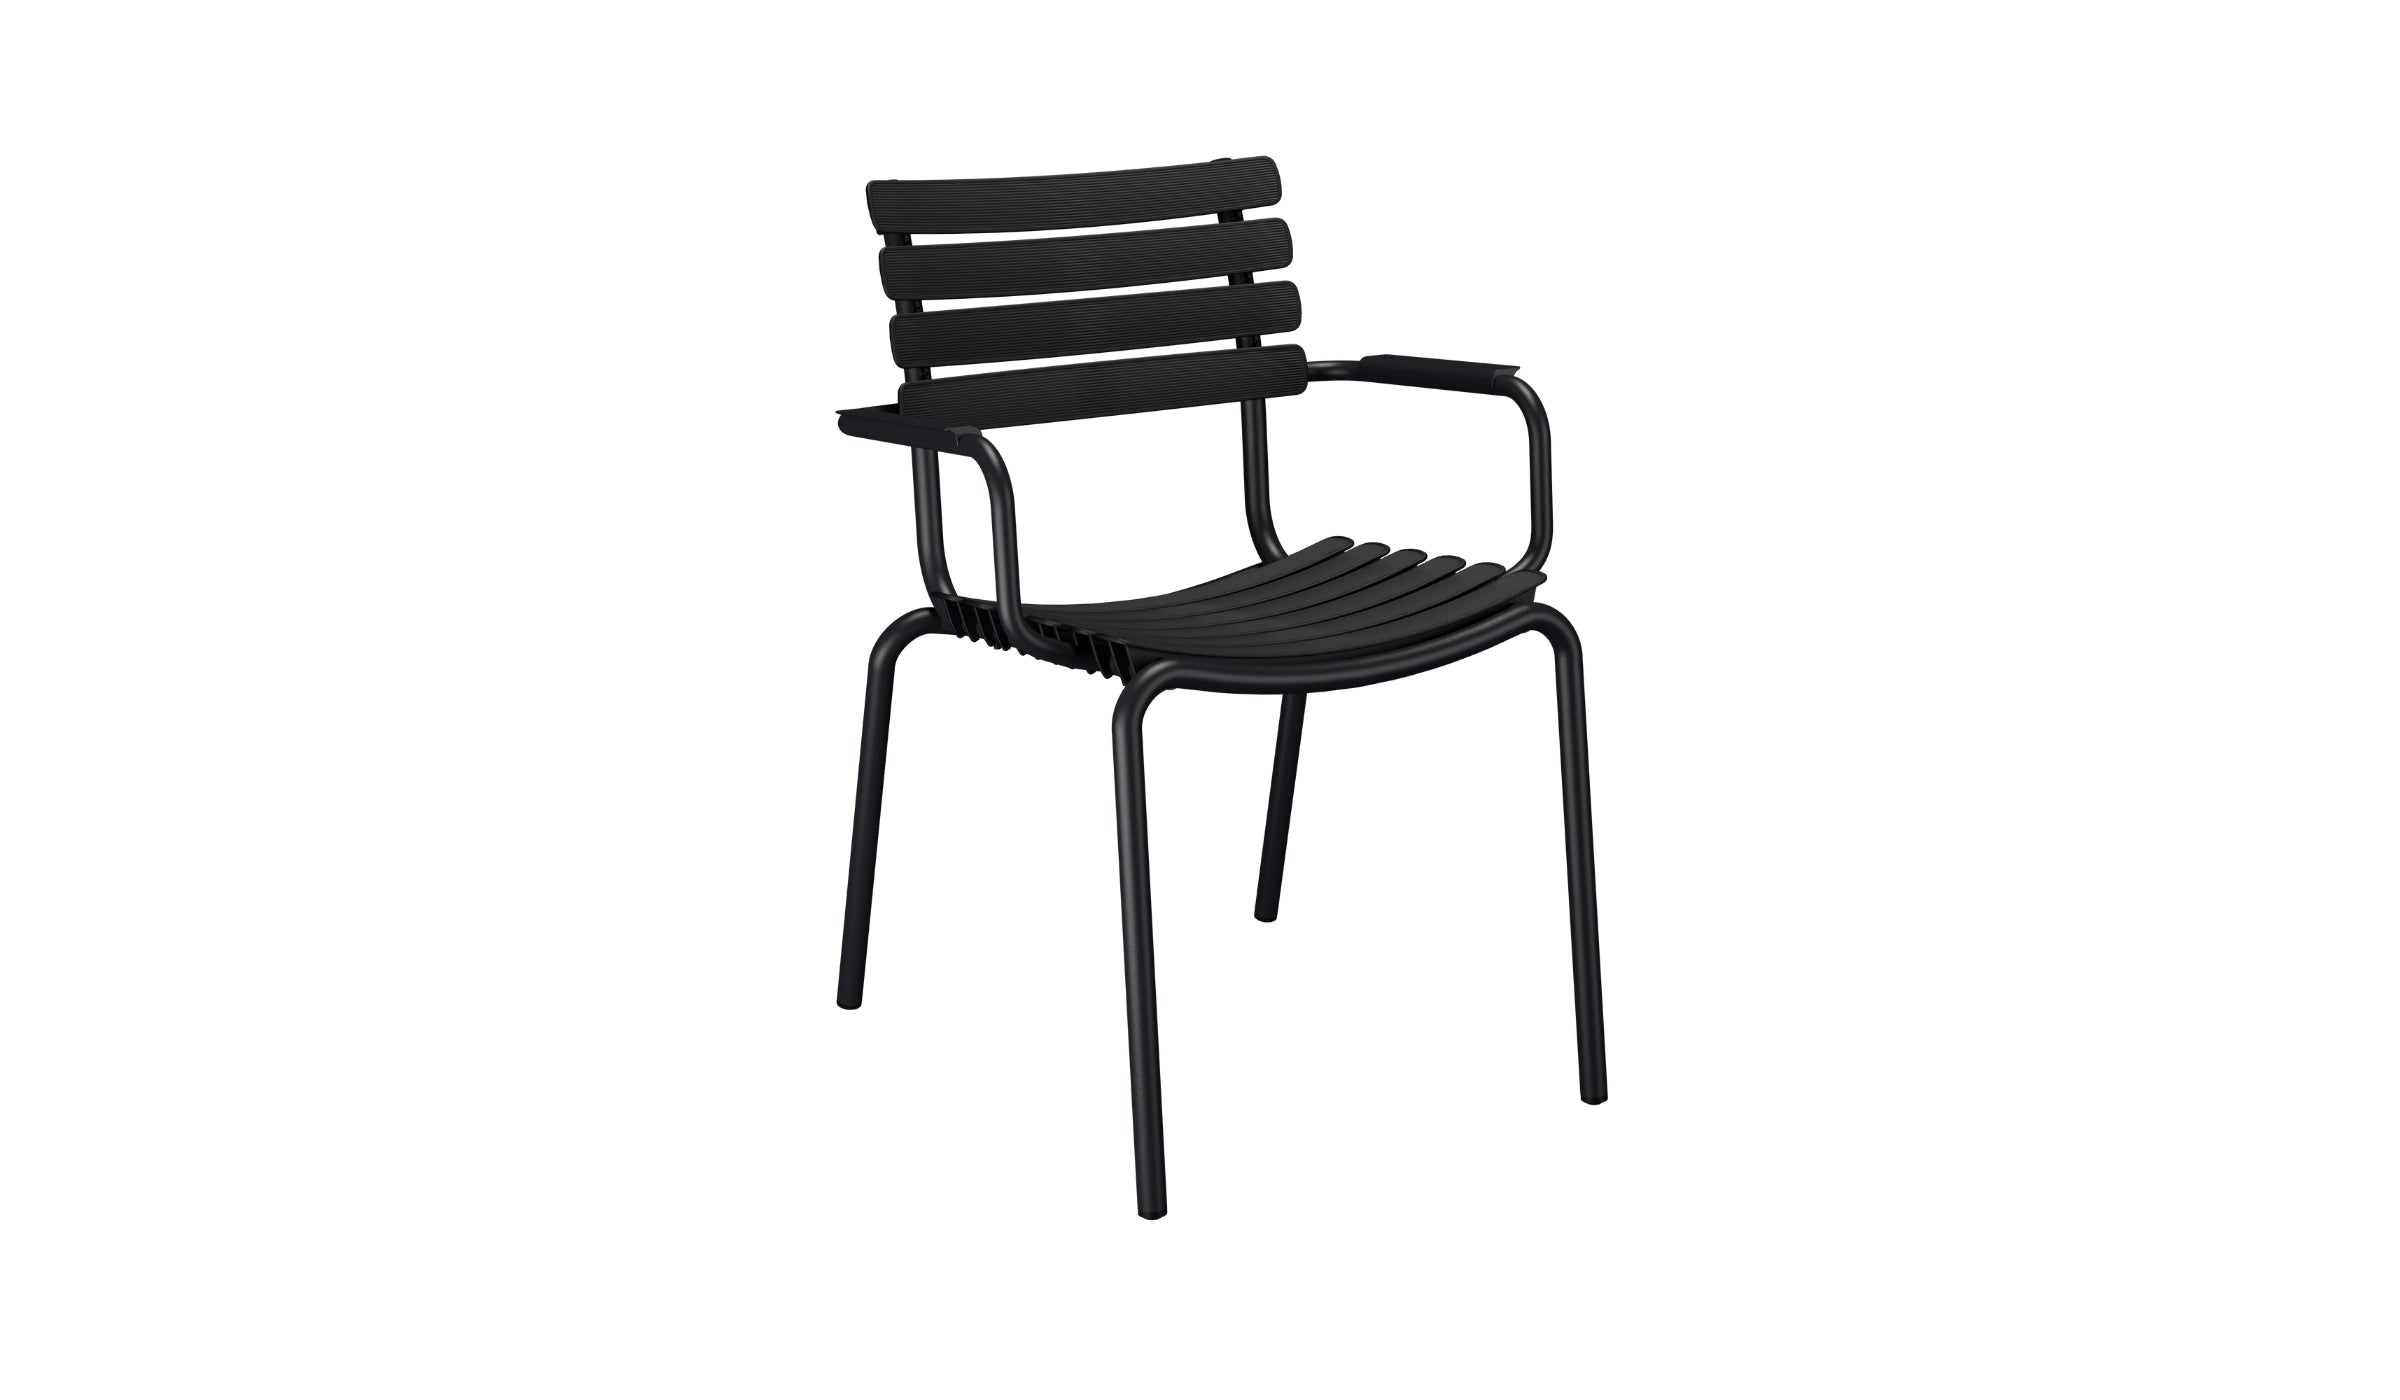 Reclips - Outdoor chair in aluminum and recycled plastic with armrests, black